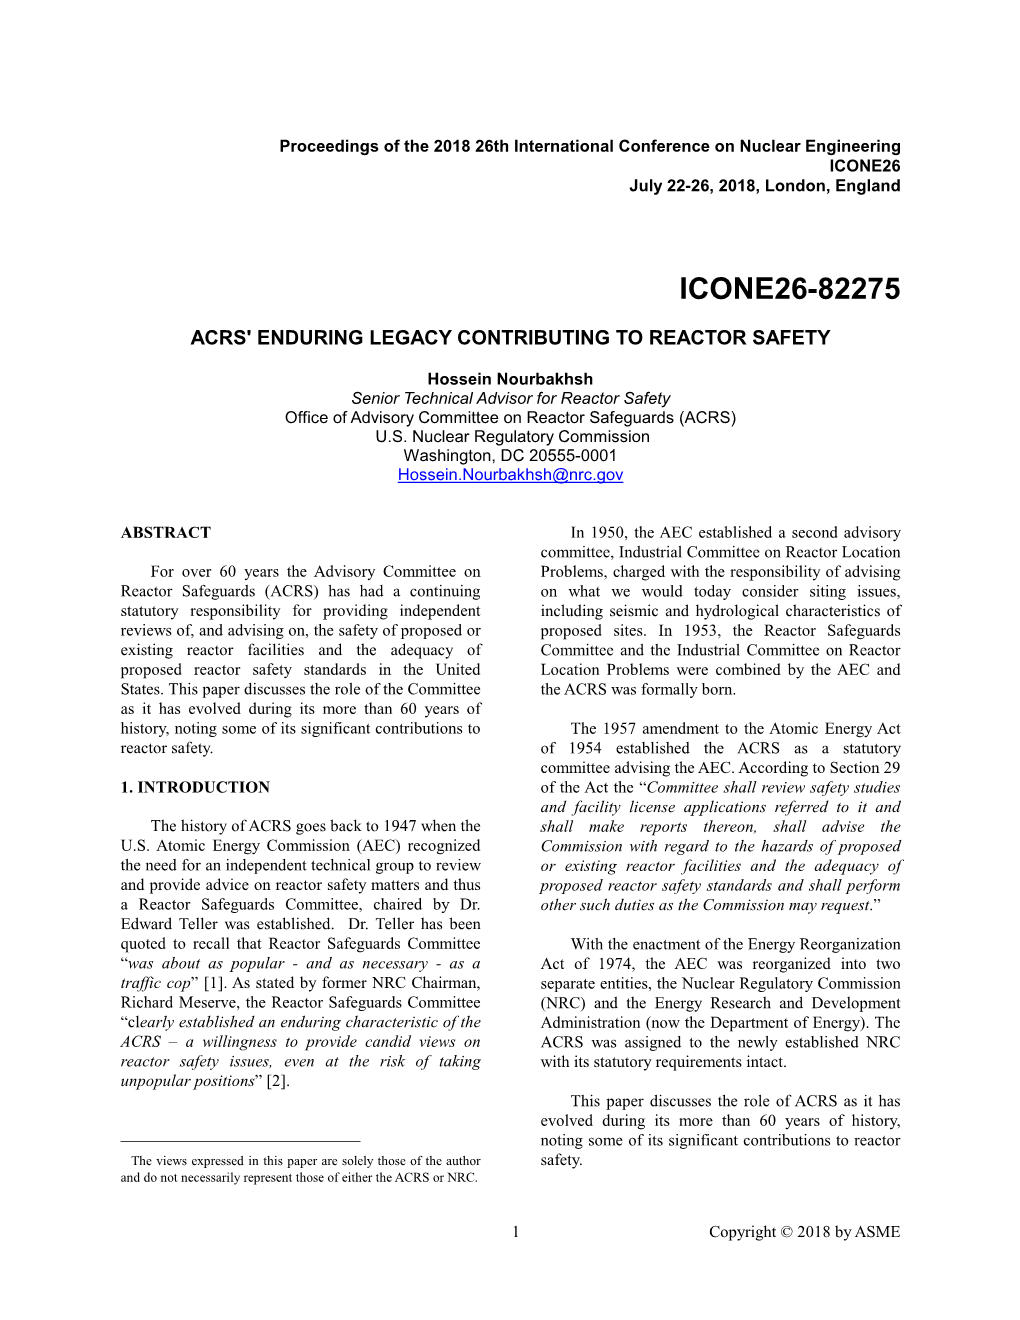 Acrs' Enduring Legacy Contributing to Reactor Safety